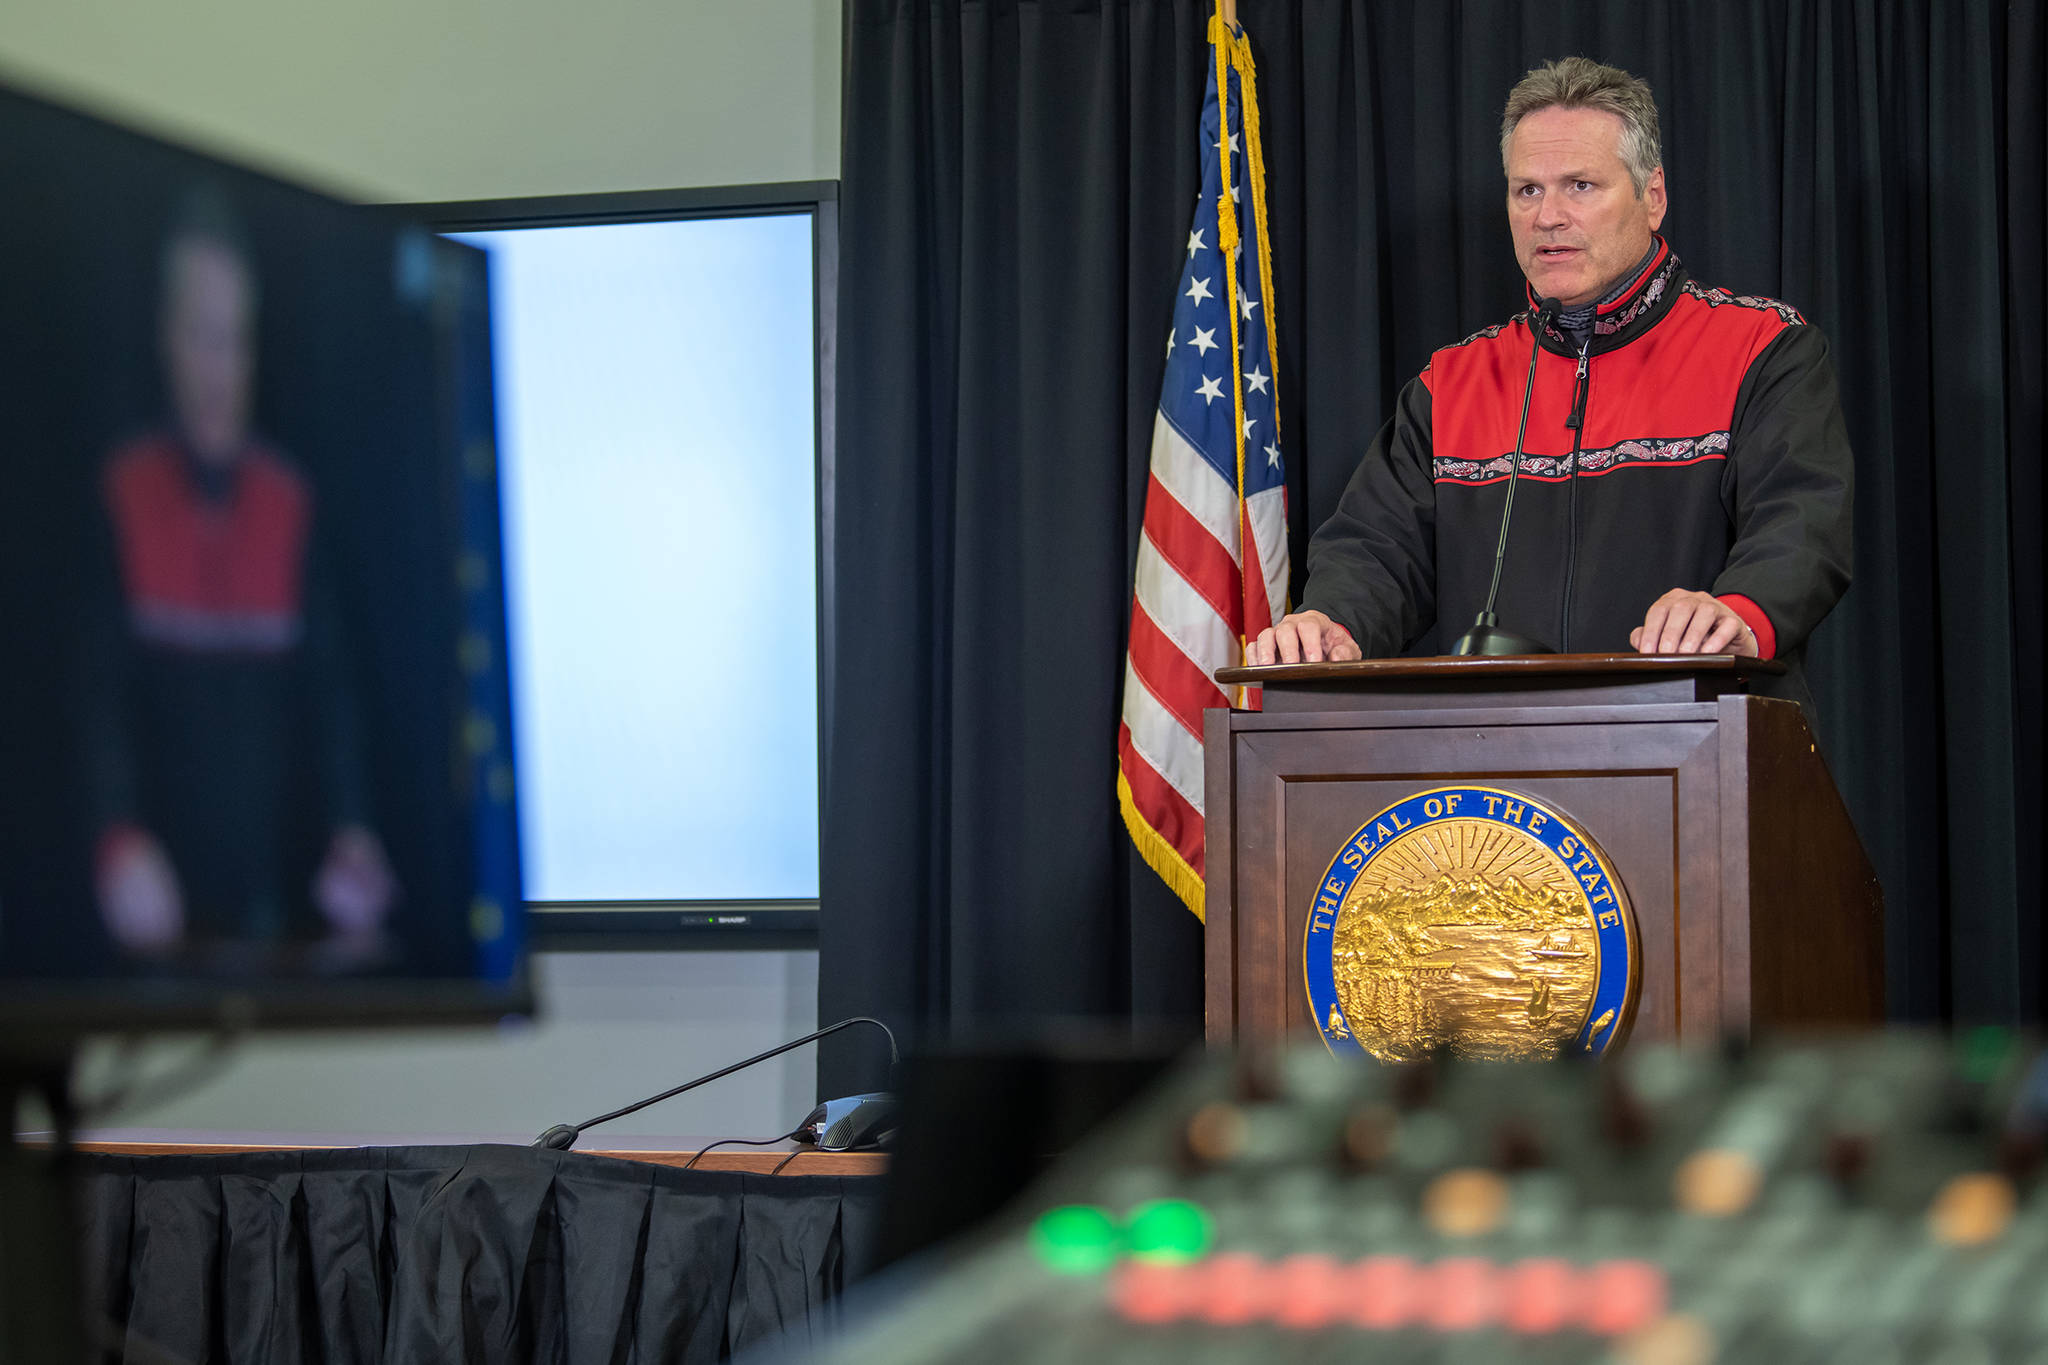 Gov. Mike Dunleavy speaks during an Aug. 11 news briefing. Dunleavy held his first news conference in over a month on Wednesday. (Courtesy Photo / Office of Gov. Mike Dunleavy)